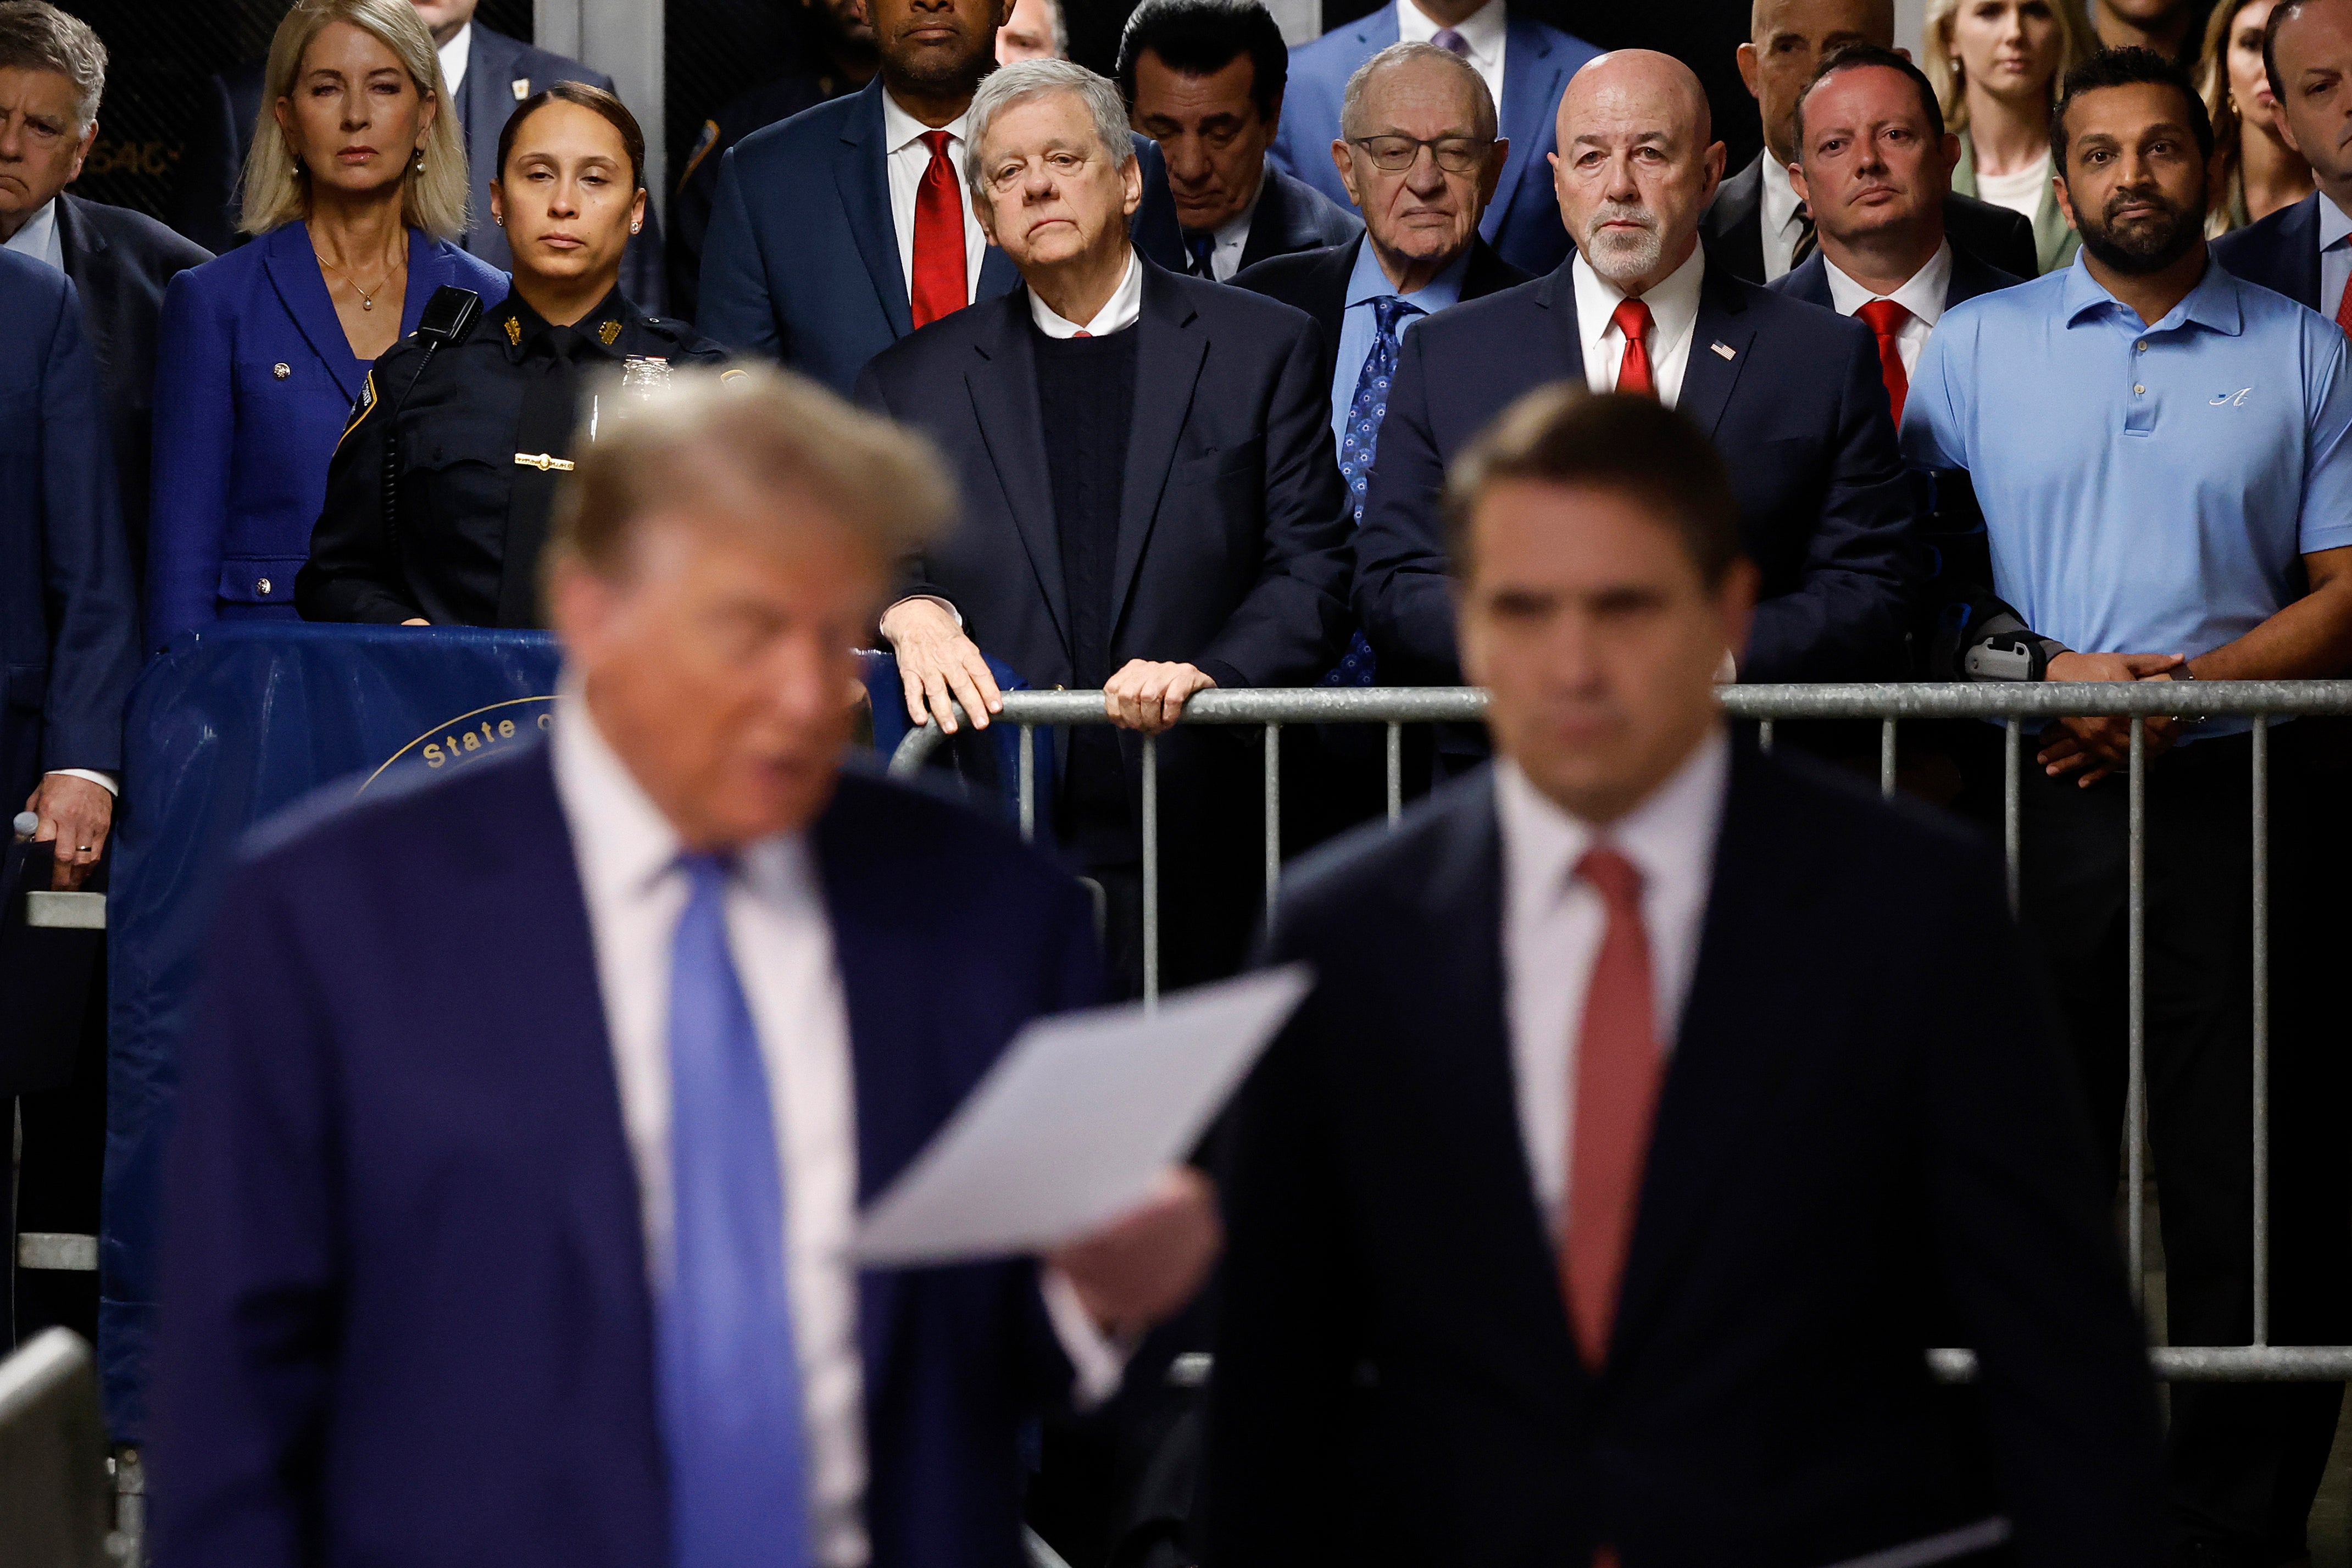 Donald Trump’s allies watch Donald Trump and his attorney Todd Blanche address reporters at his criminal trial in Manhattan on May 20.